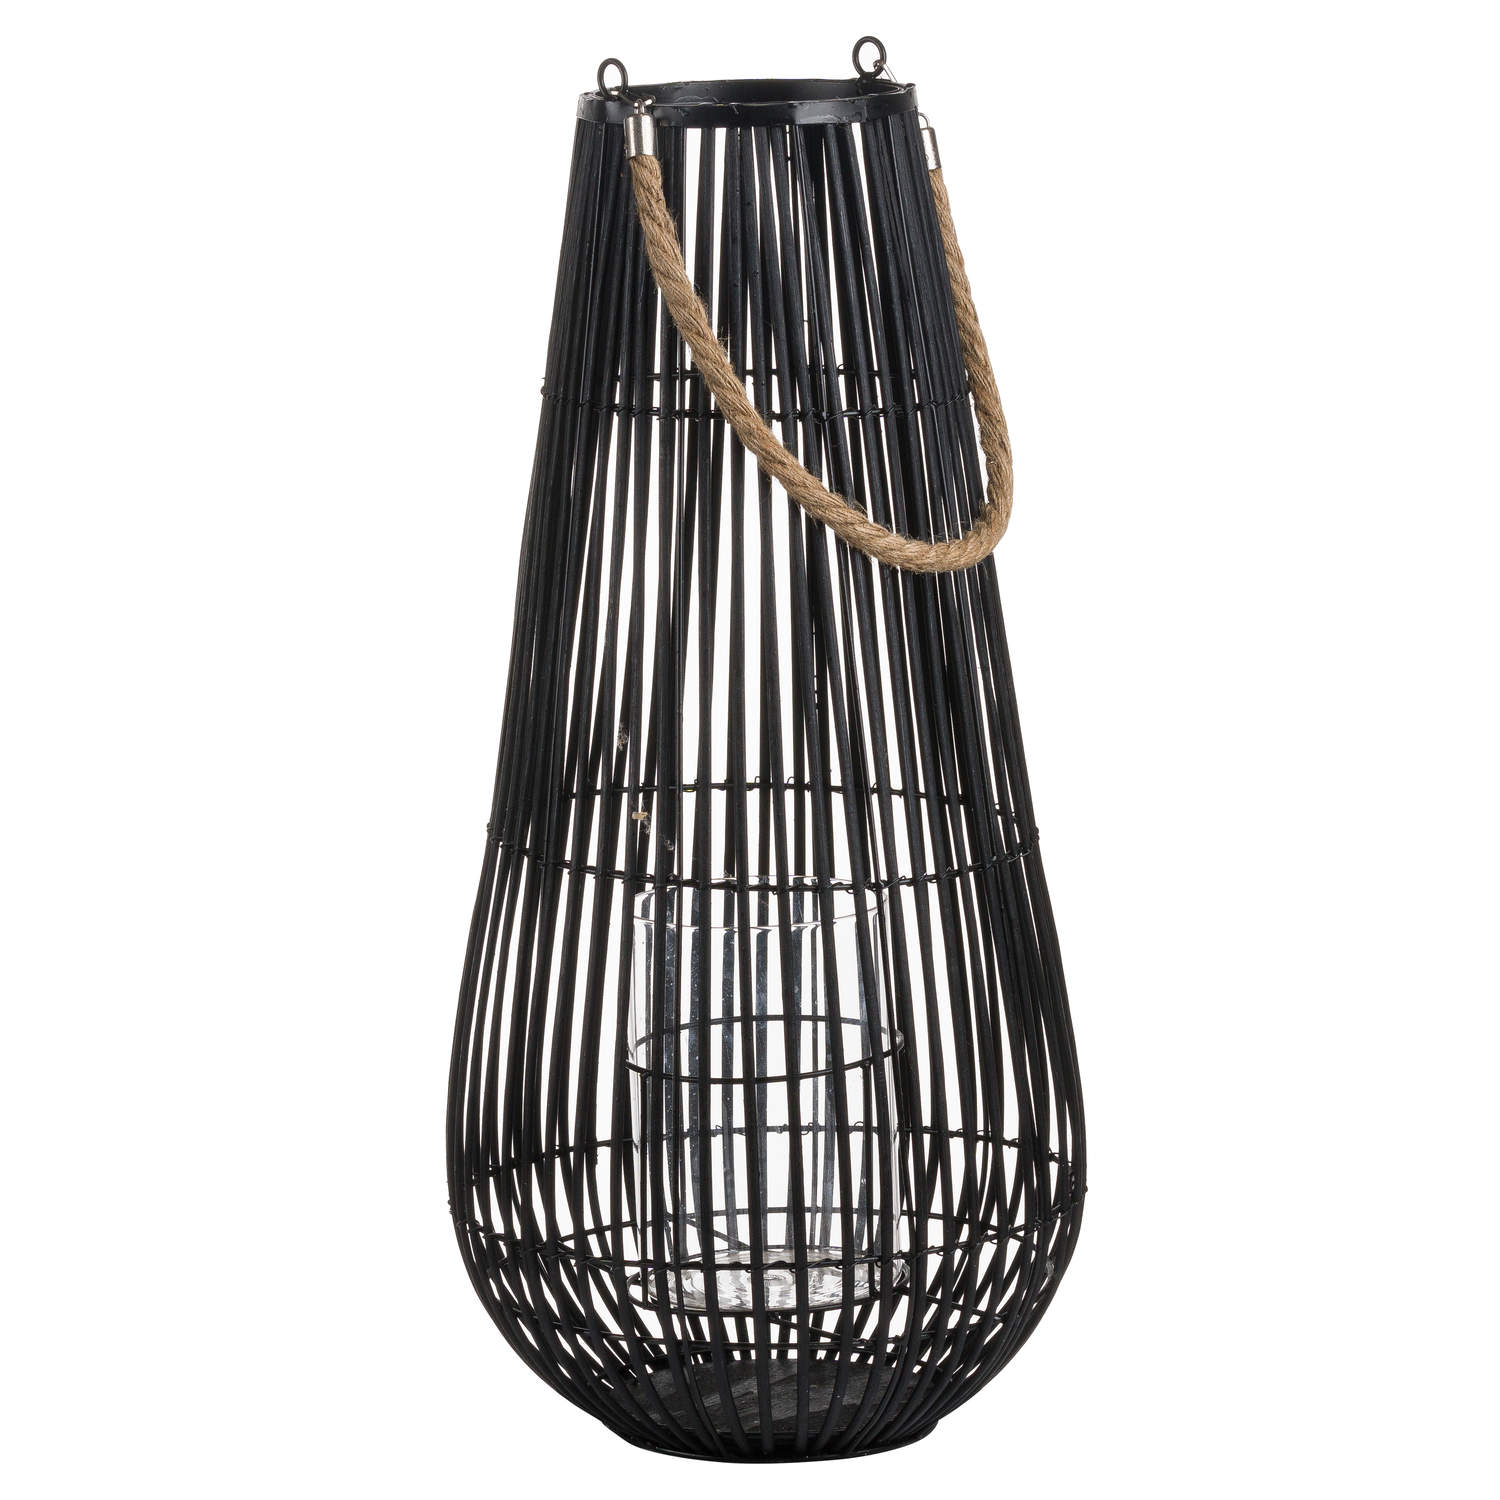 Small Domed Rattan Lantern With Rope Detail